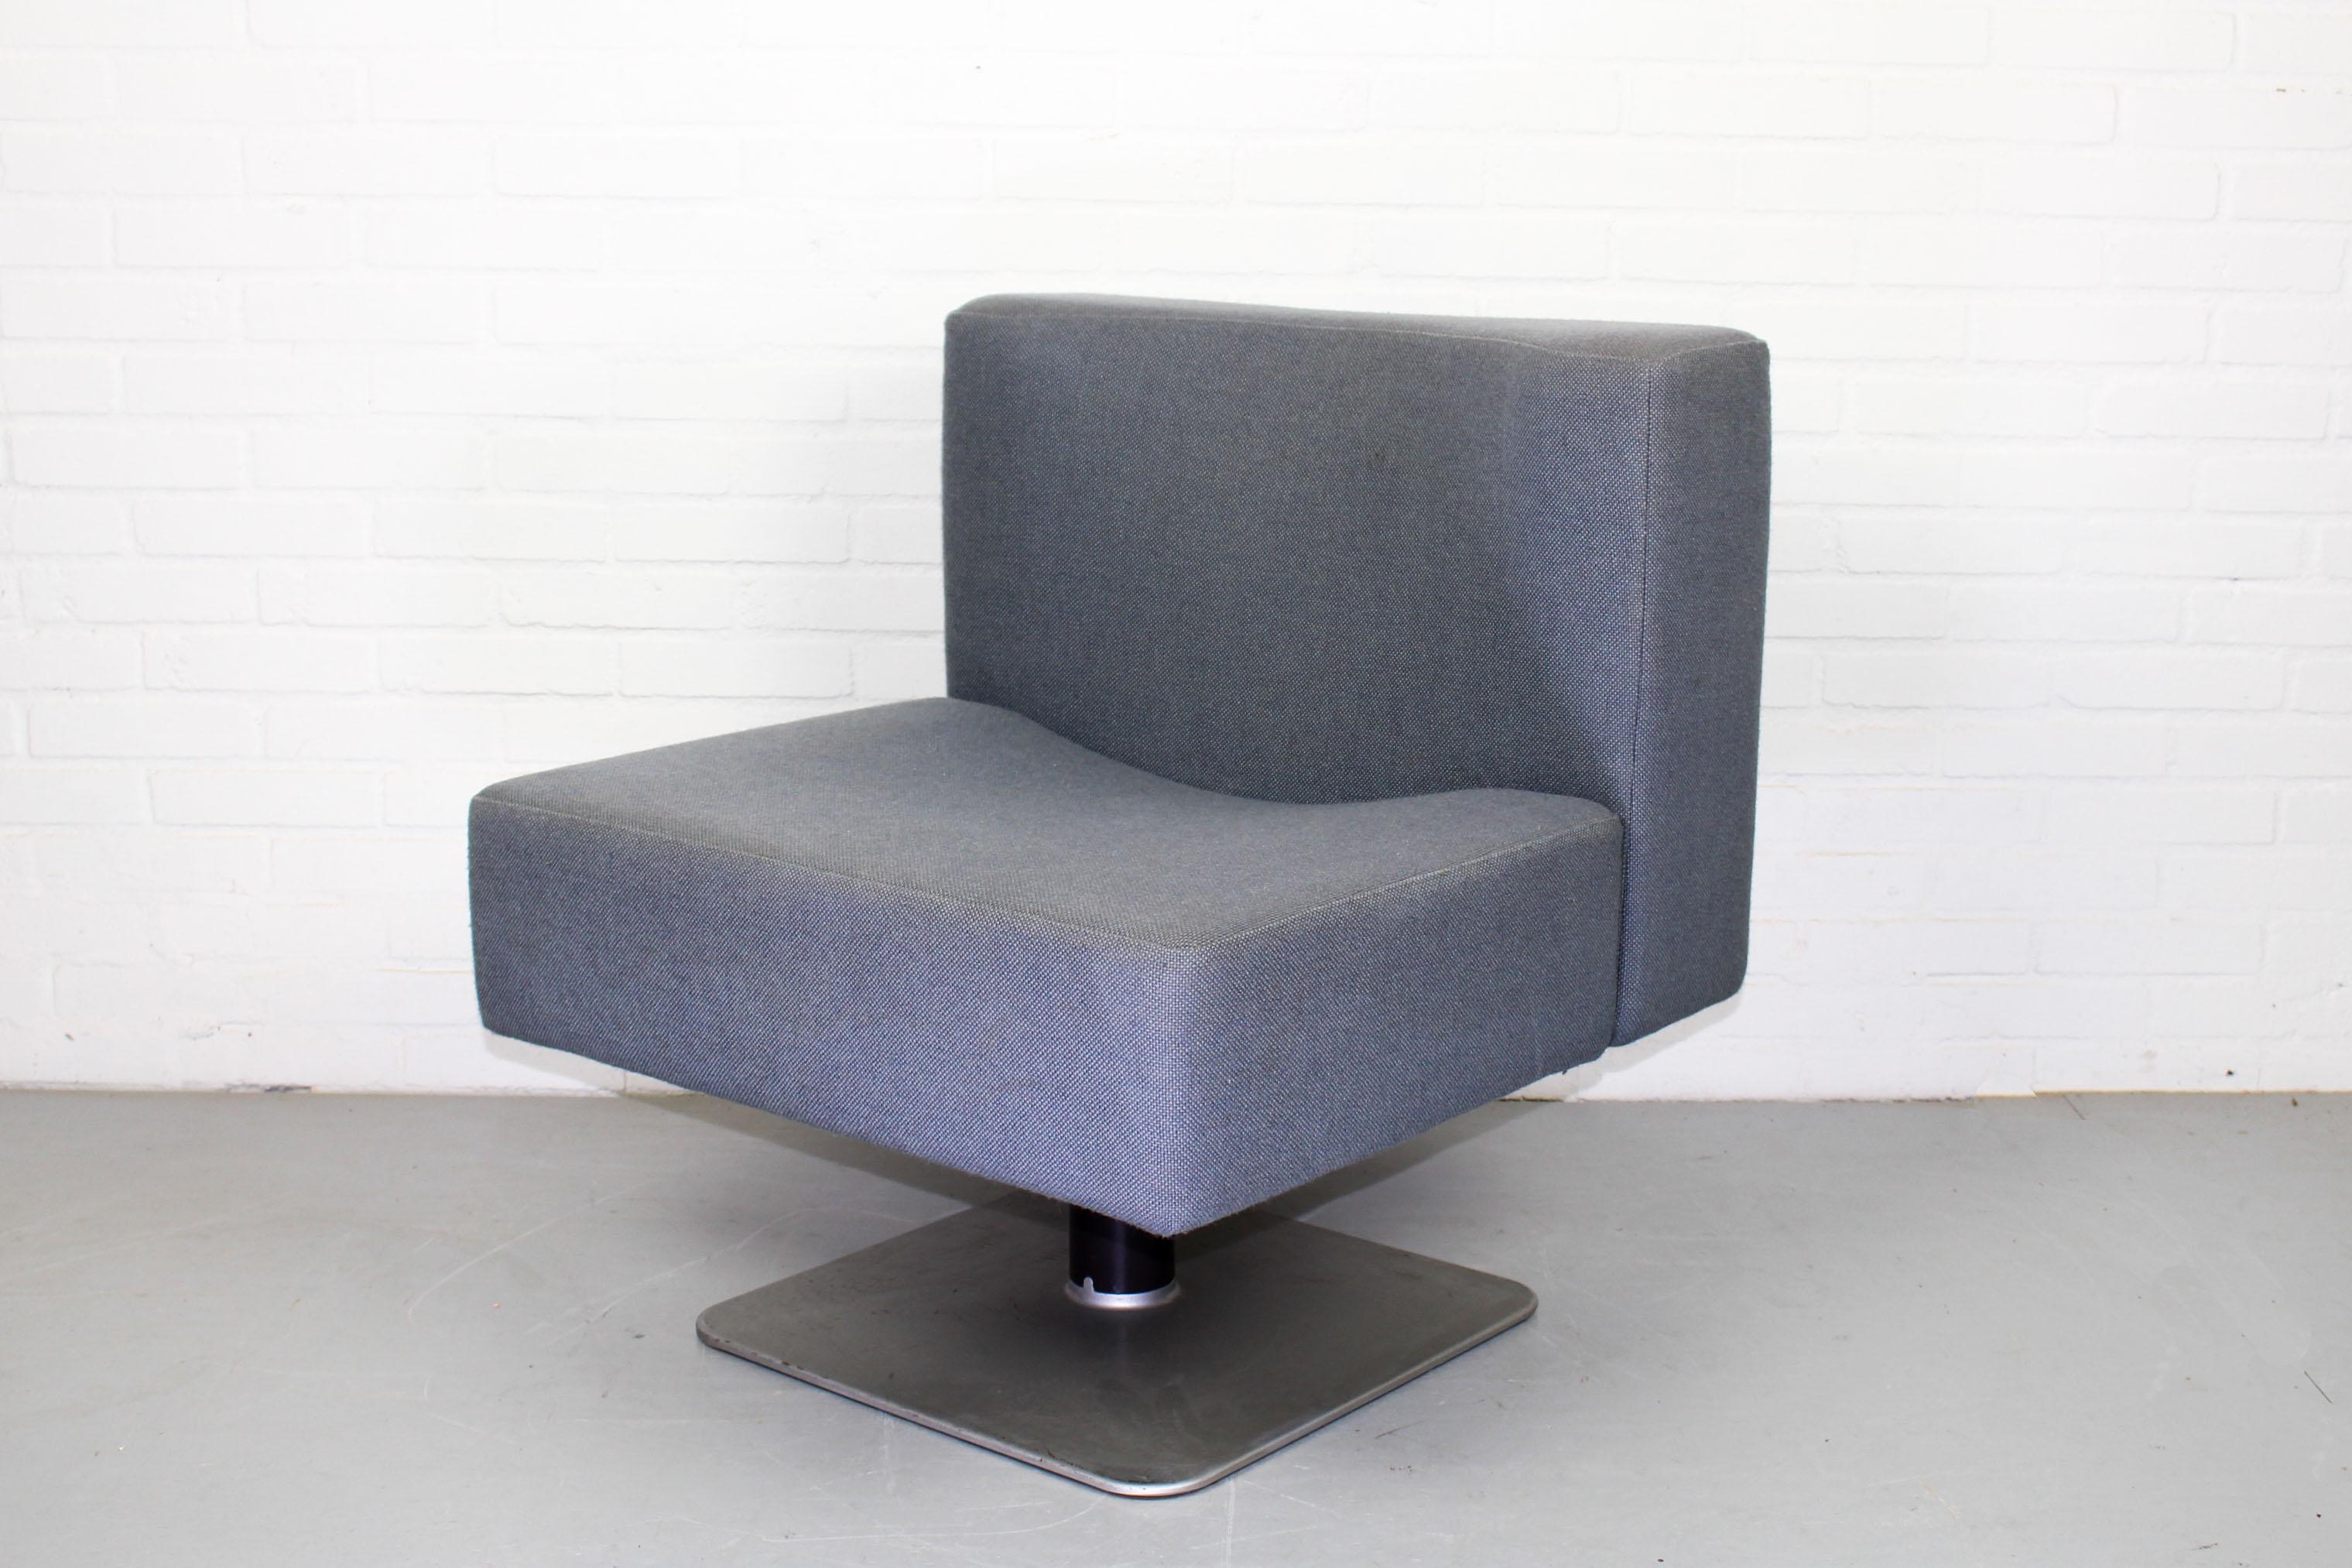 Dutch System 350 Lounge Chair by Herbert Hirche for Mauser, 1974